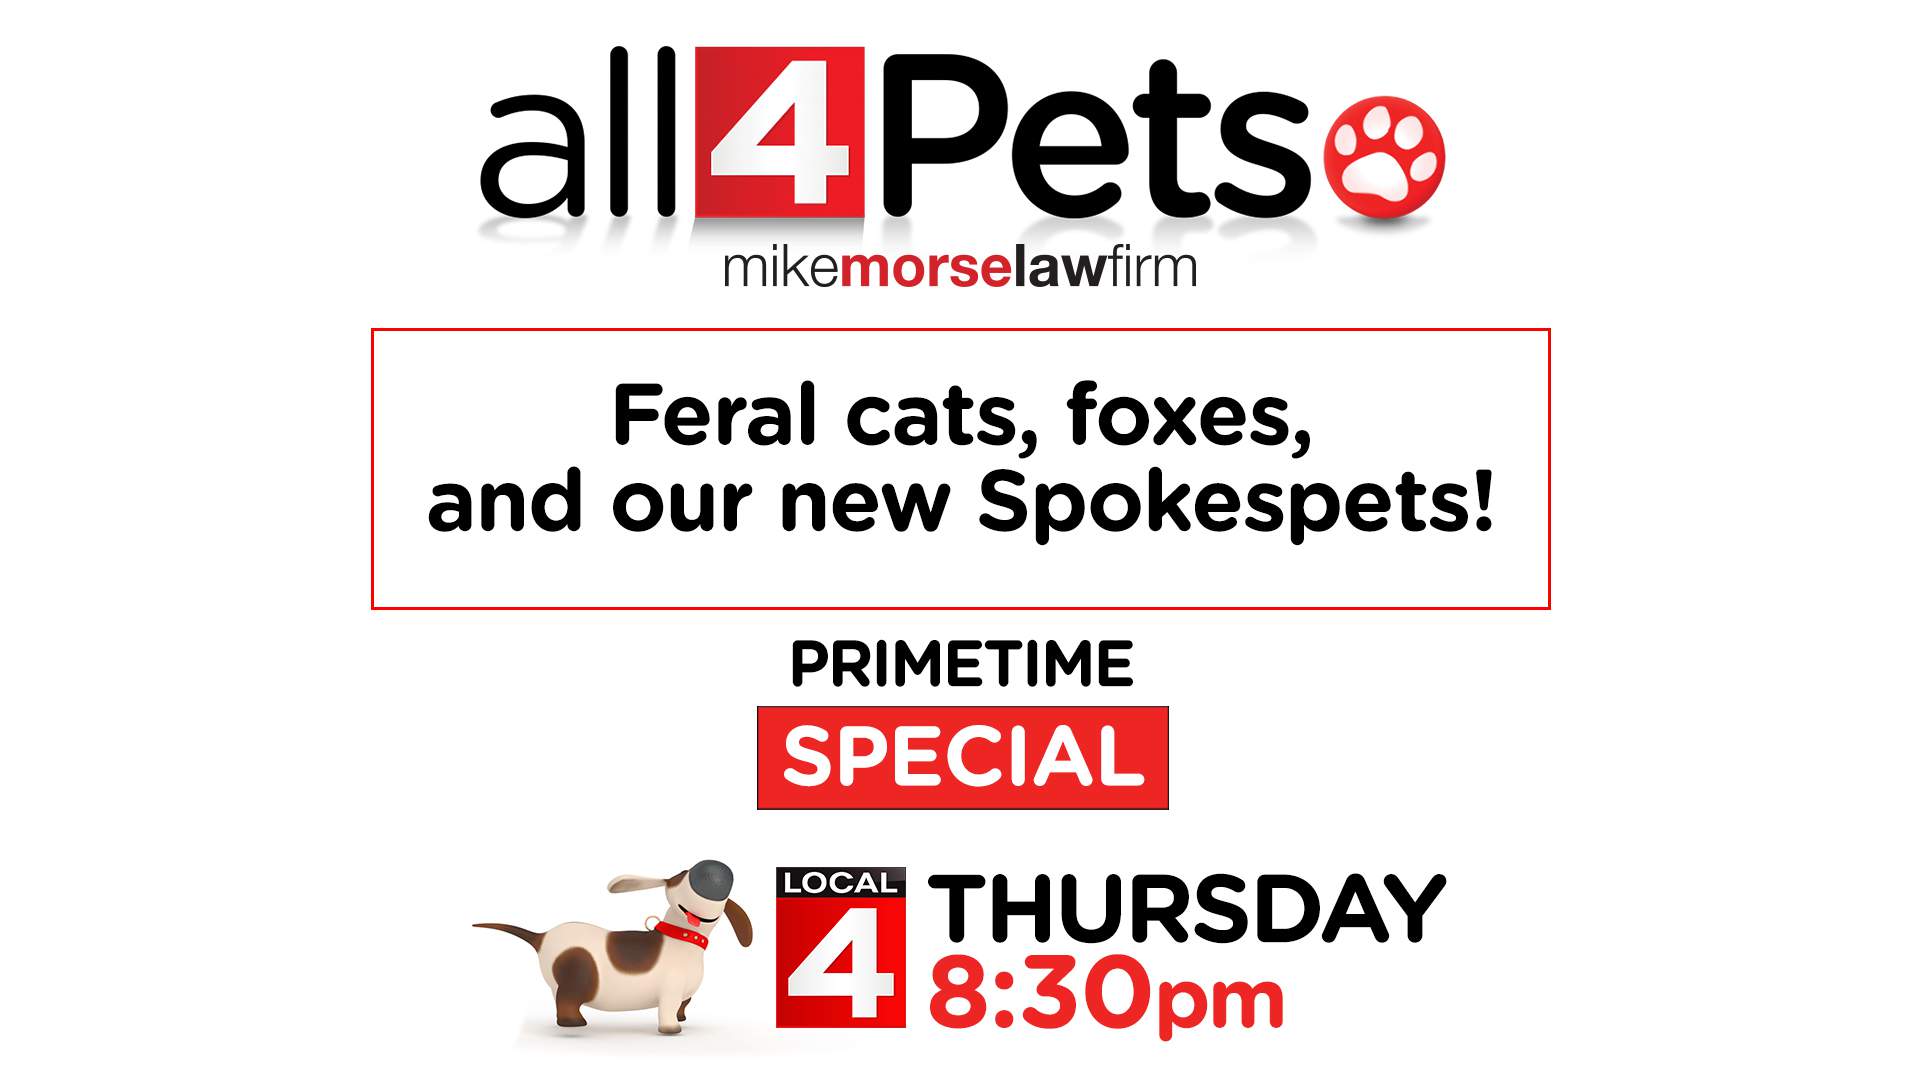 Watch full special here: ‘All 4 Pets’ special with feral cats, foxes, new Spokespets